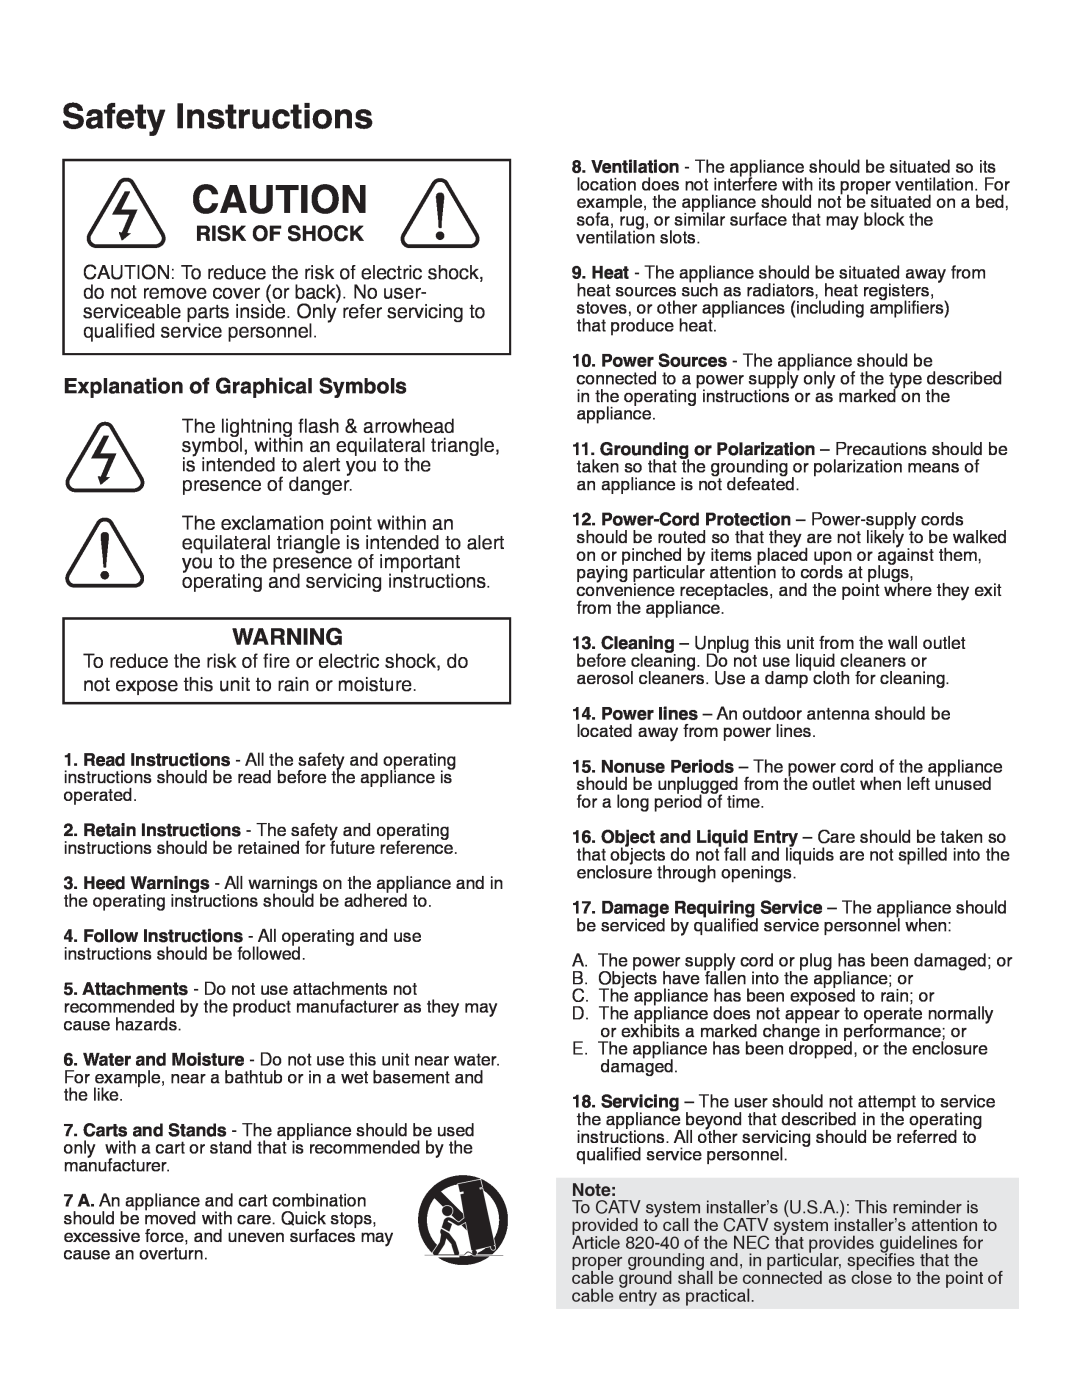 VocoPro DA-1055 PRO owner manual Safety Instructions, Risk Of Shock, Explanation of Graphical Symbols 